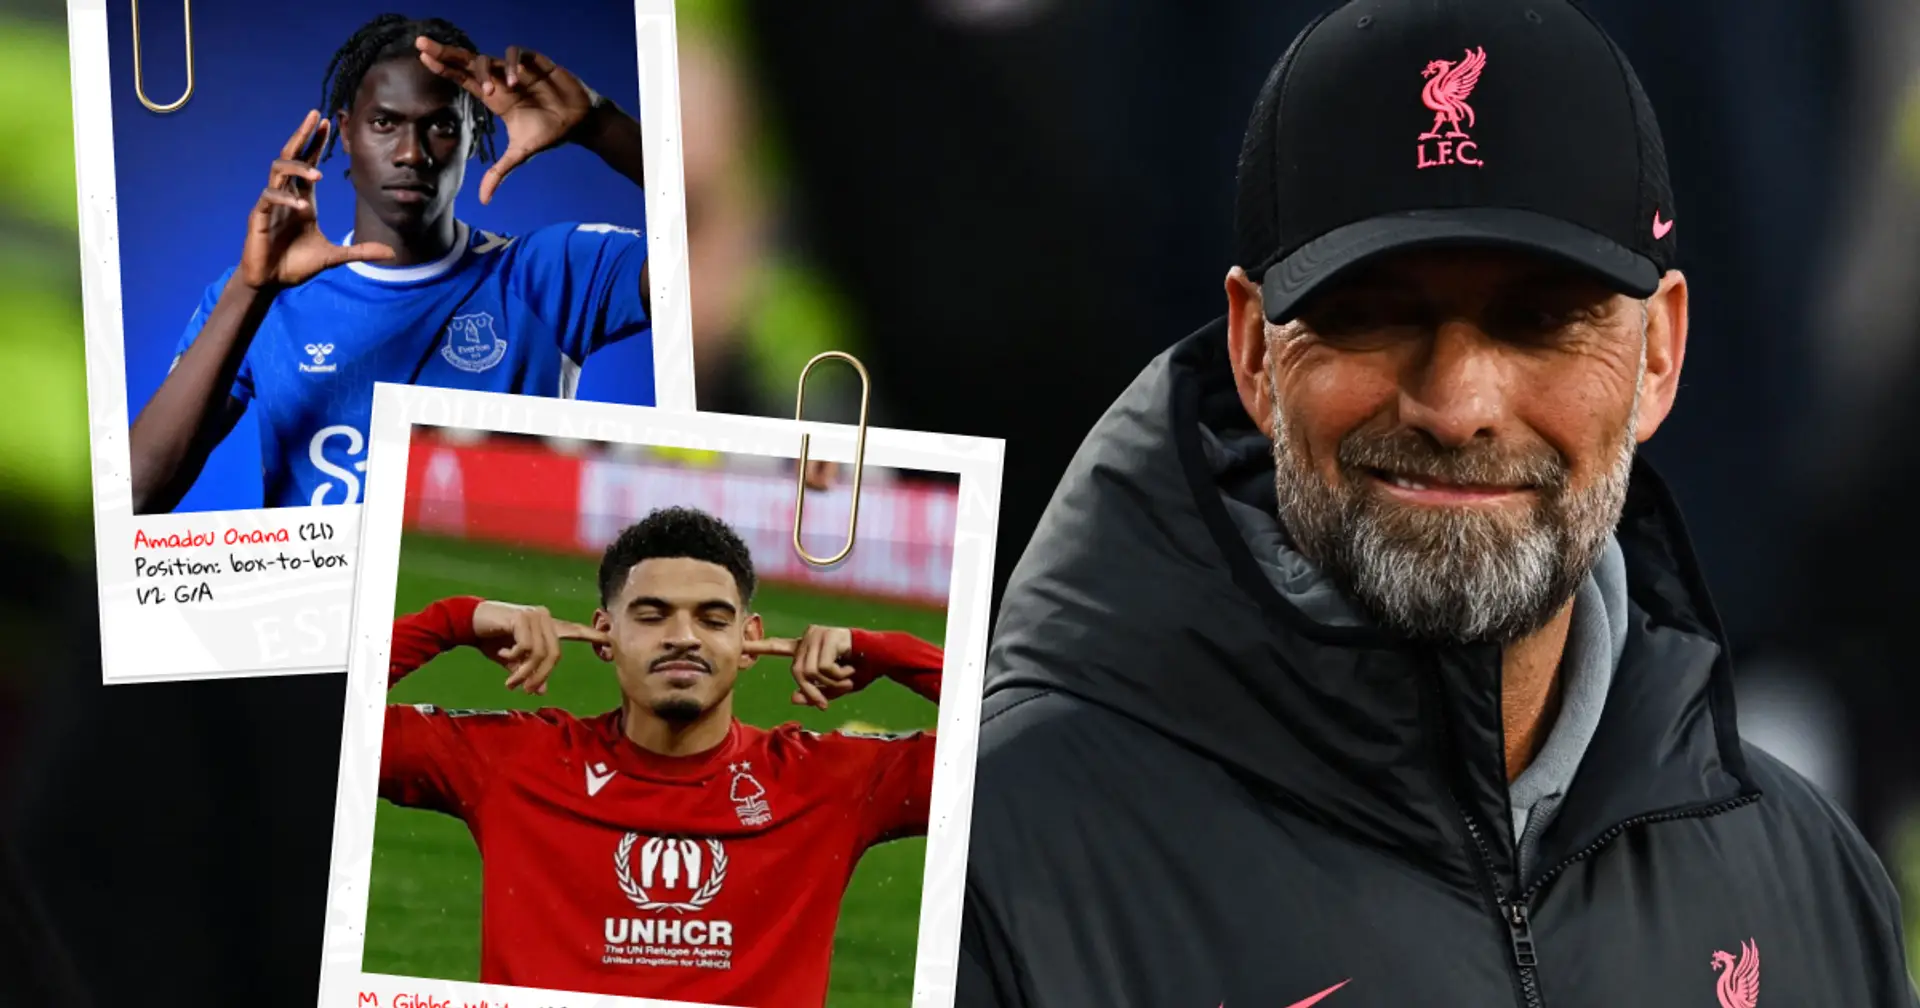 Gibbs-White, Ward-Prowse & 3 more top midfielders Liverpool might want to pluck from relegation fodder